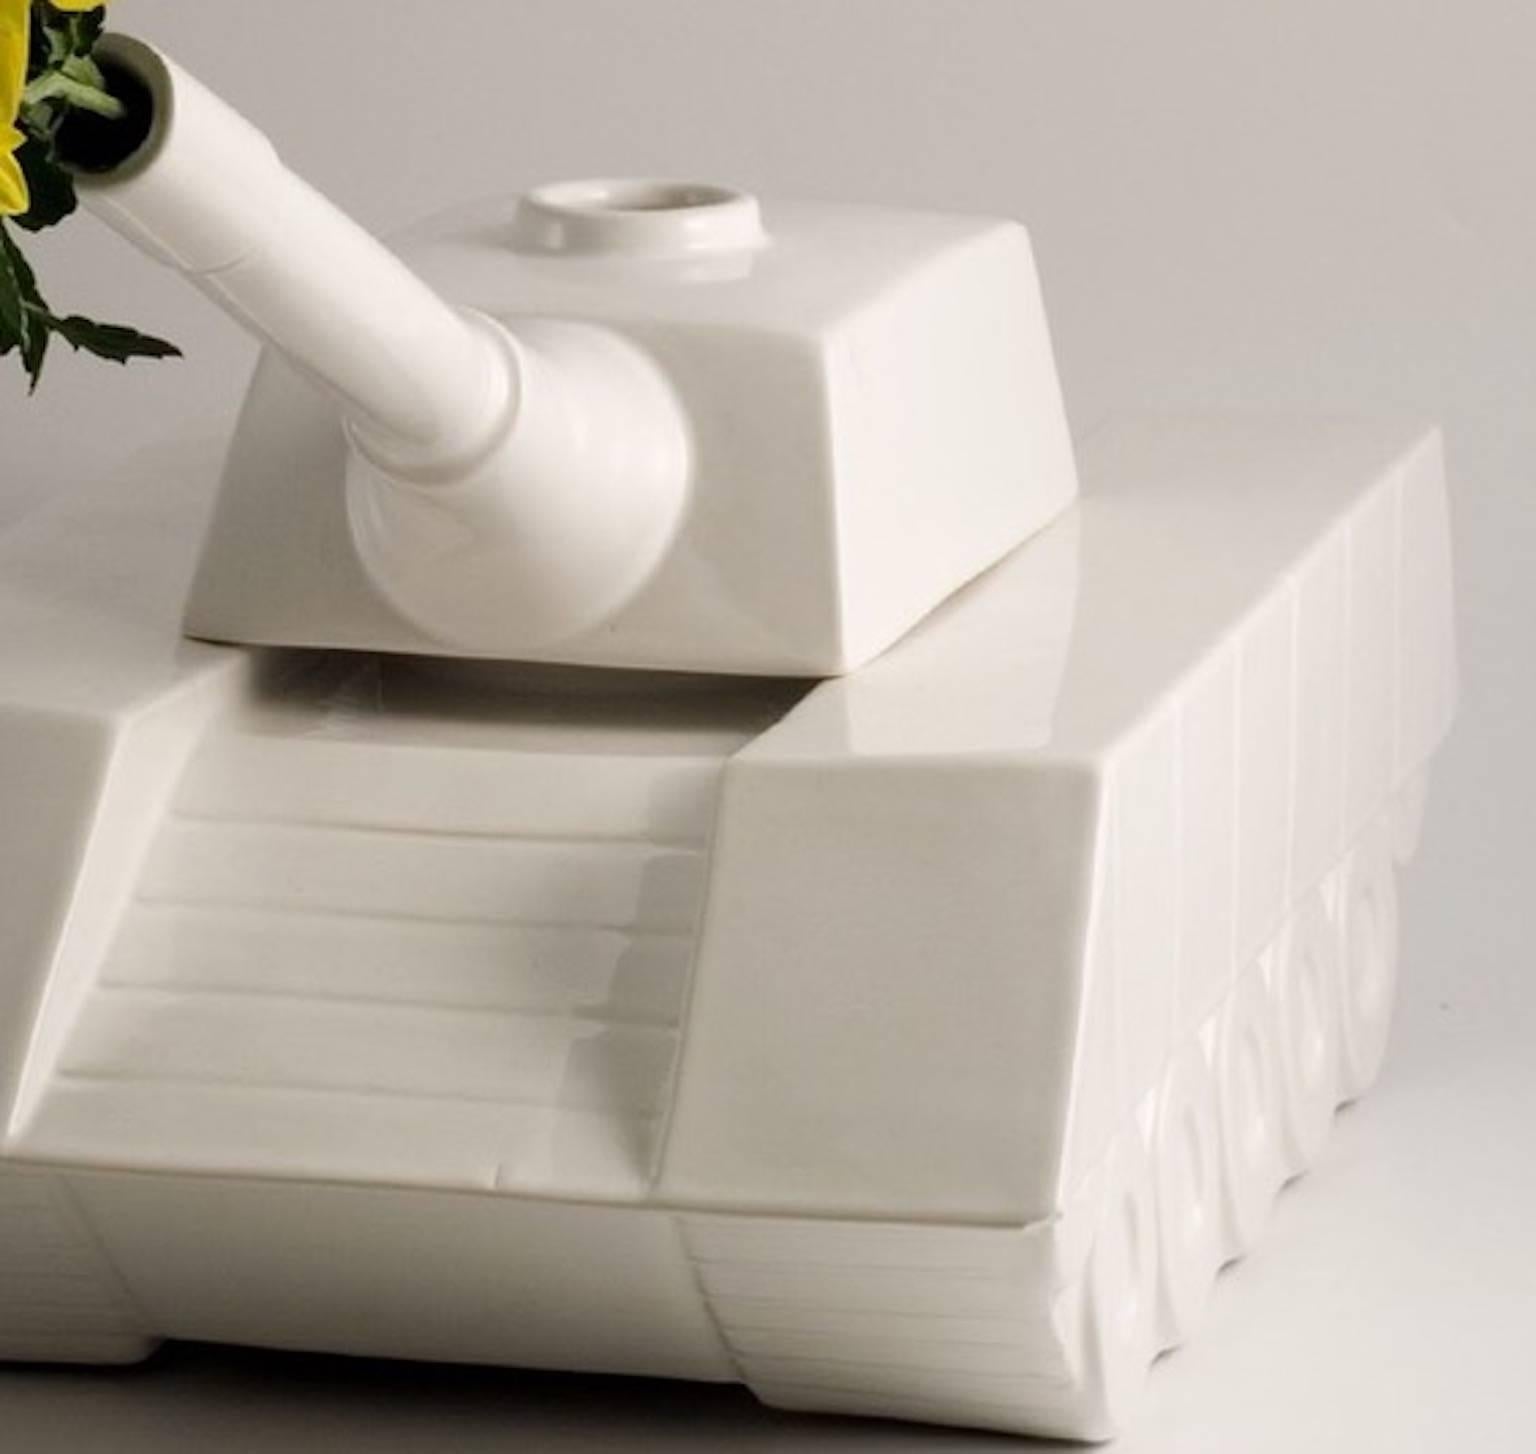 Love tank ceramic sculpture from Love Tank collection designed by Andrea Visconti for Superego Editions. Limited edition of 99 pieces. Signed and numbered.
This vase refers to the motif of the peace movement of the 1970s: 